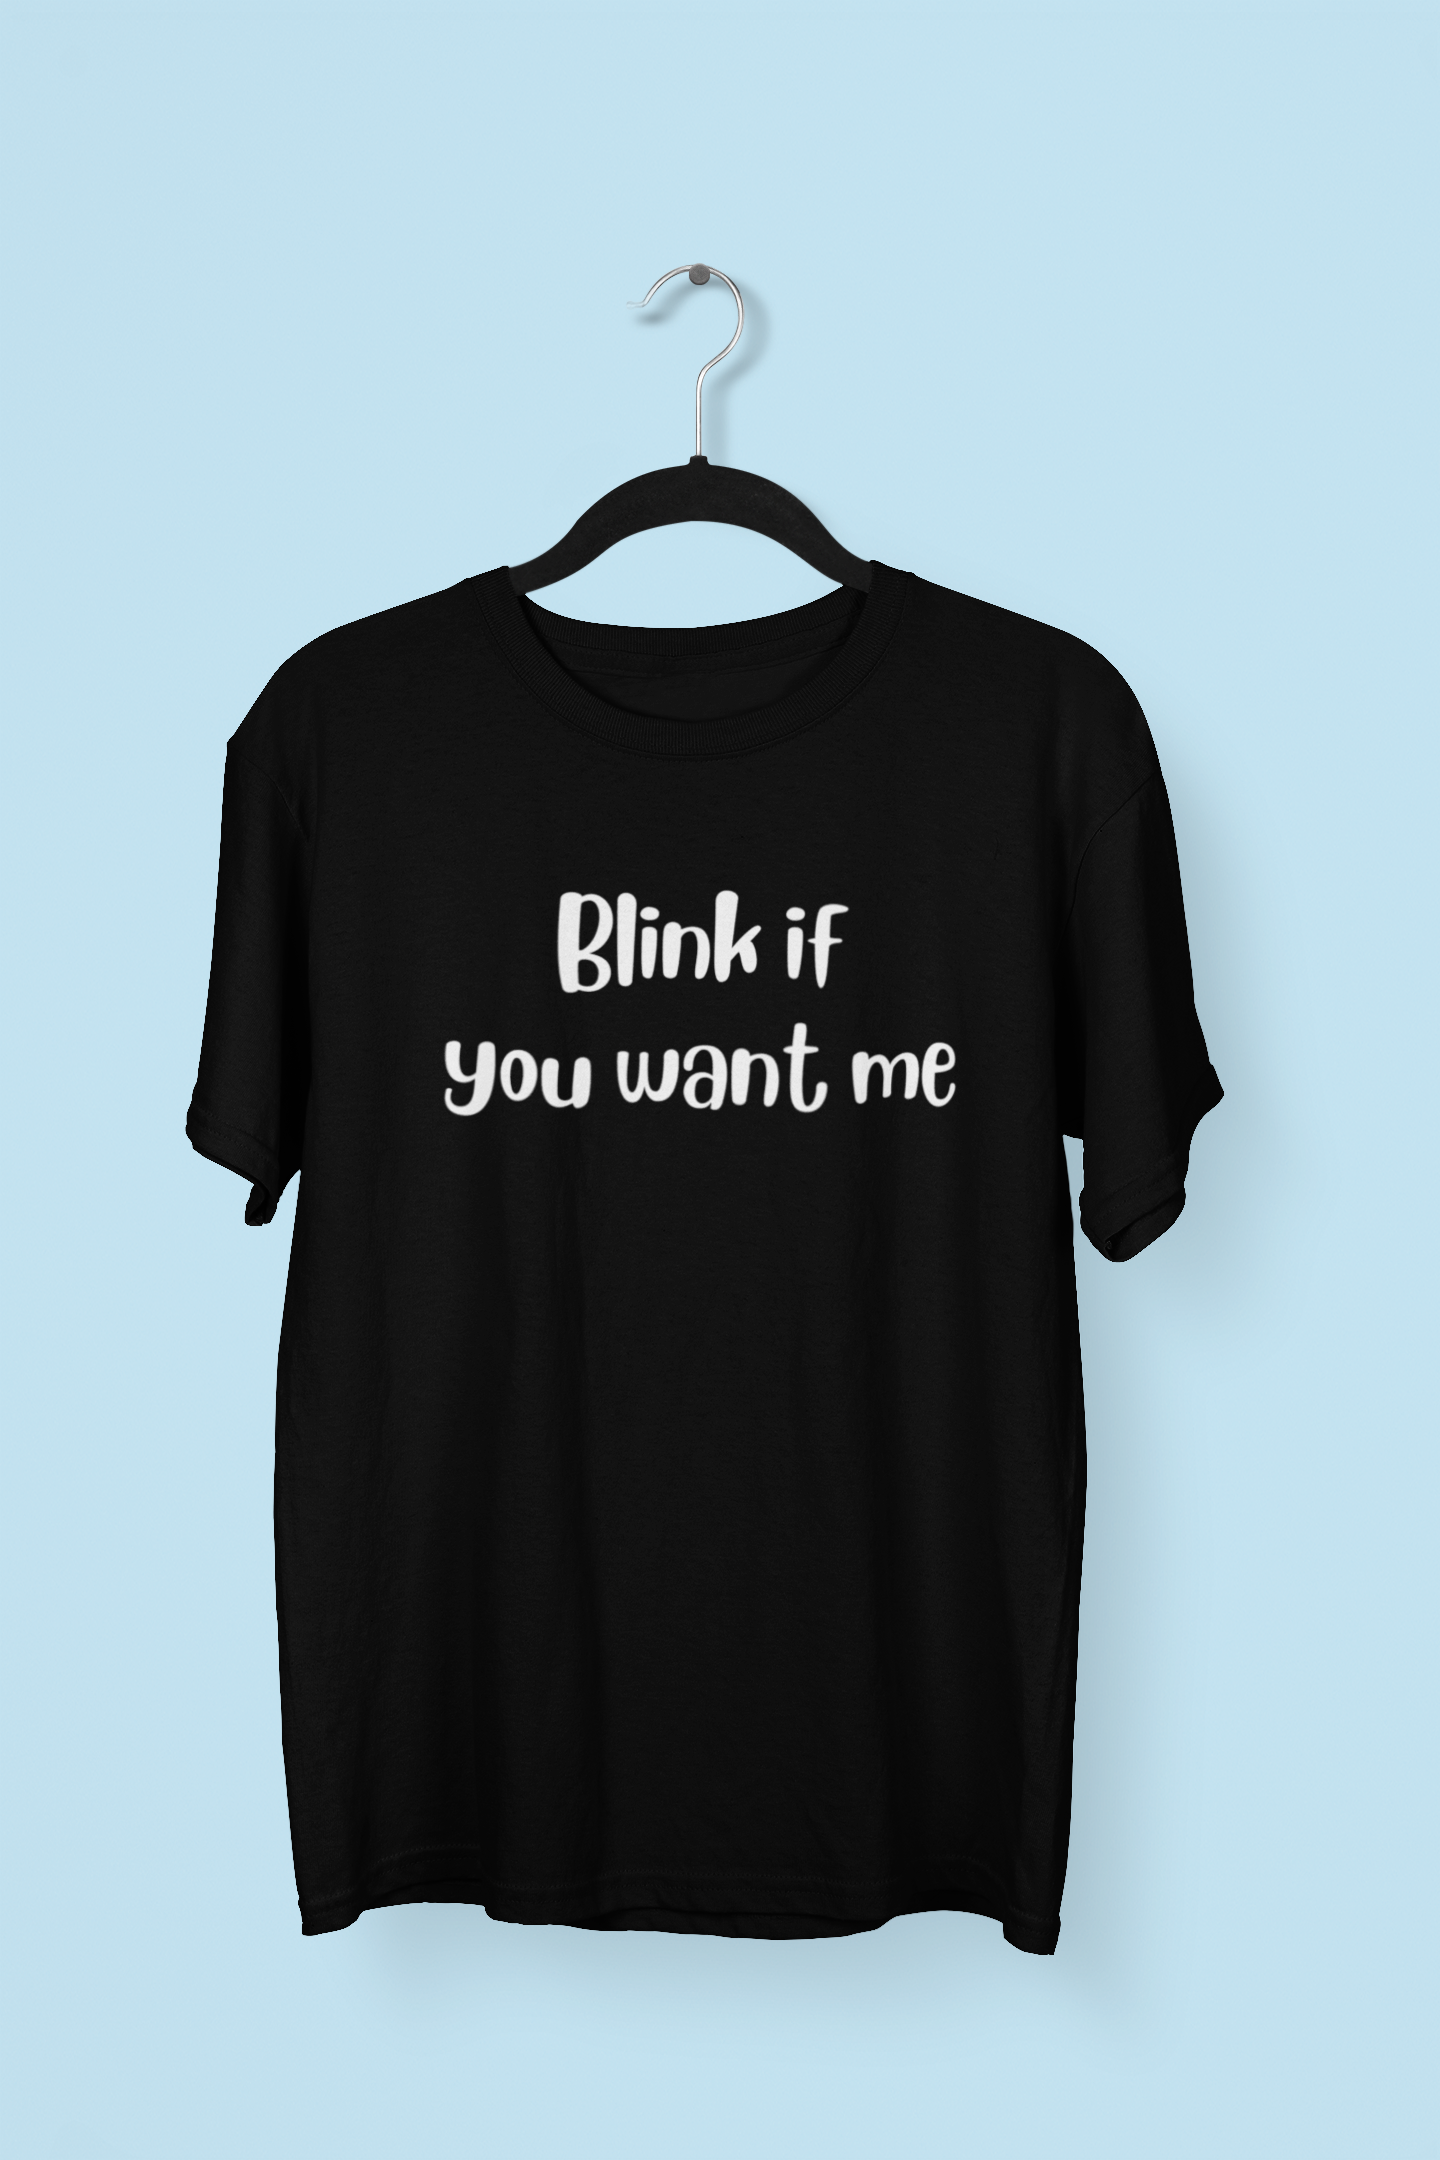 Blink if you want me Obnoxious Apparel - Funny Offensive Shirts for Men